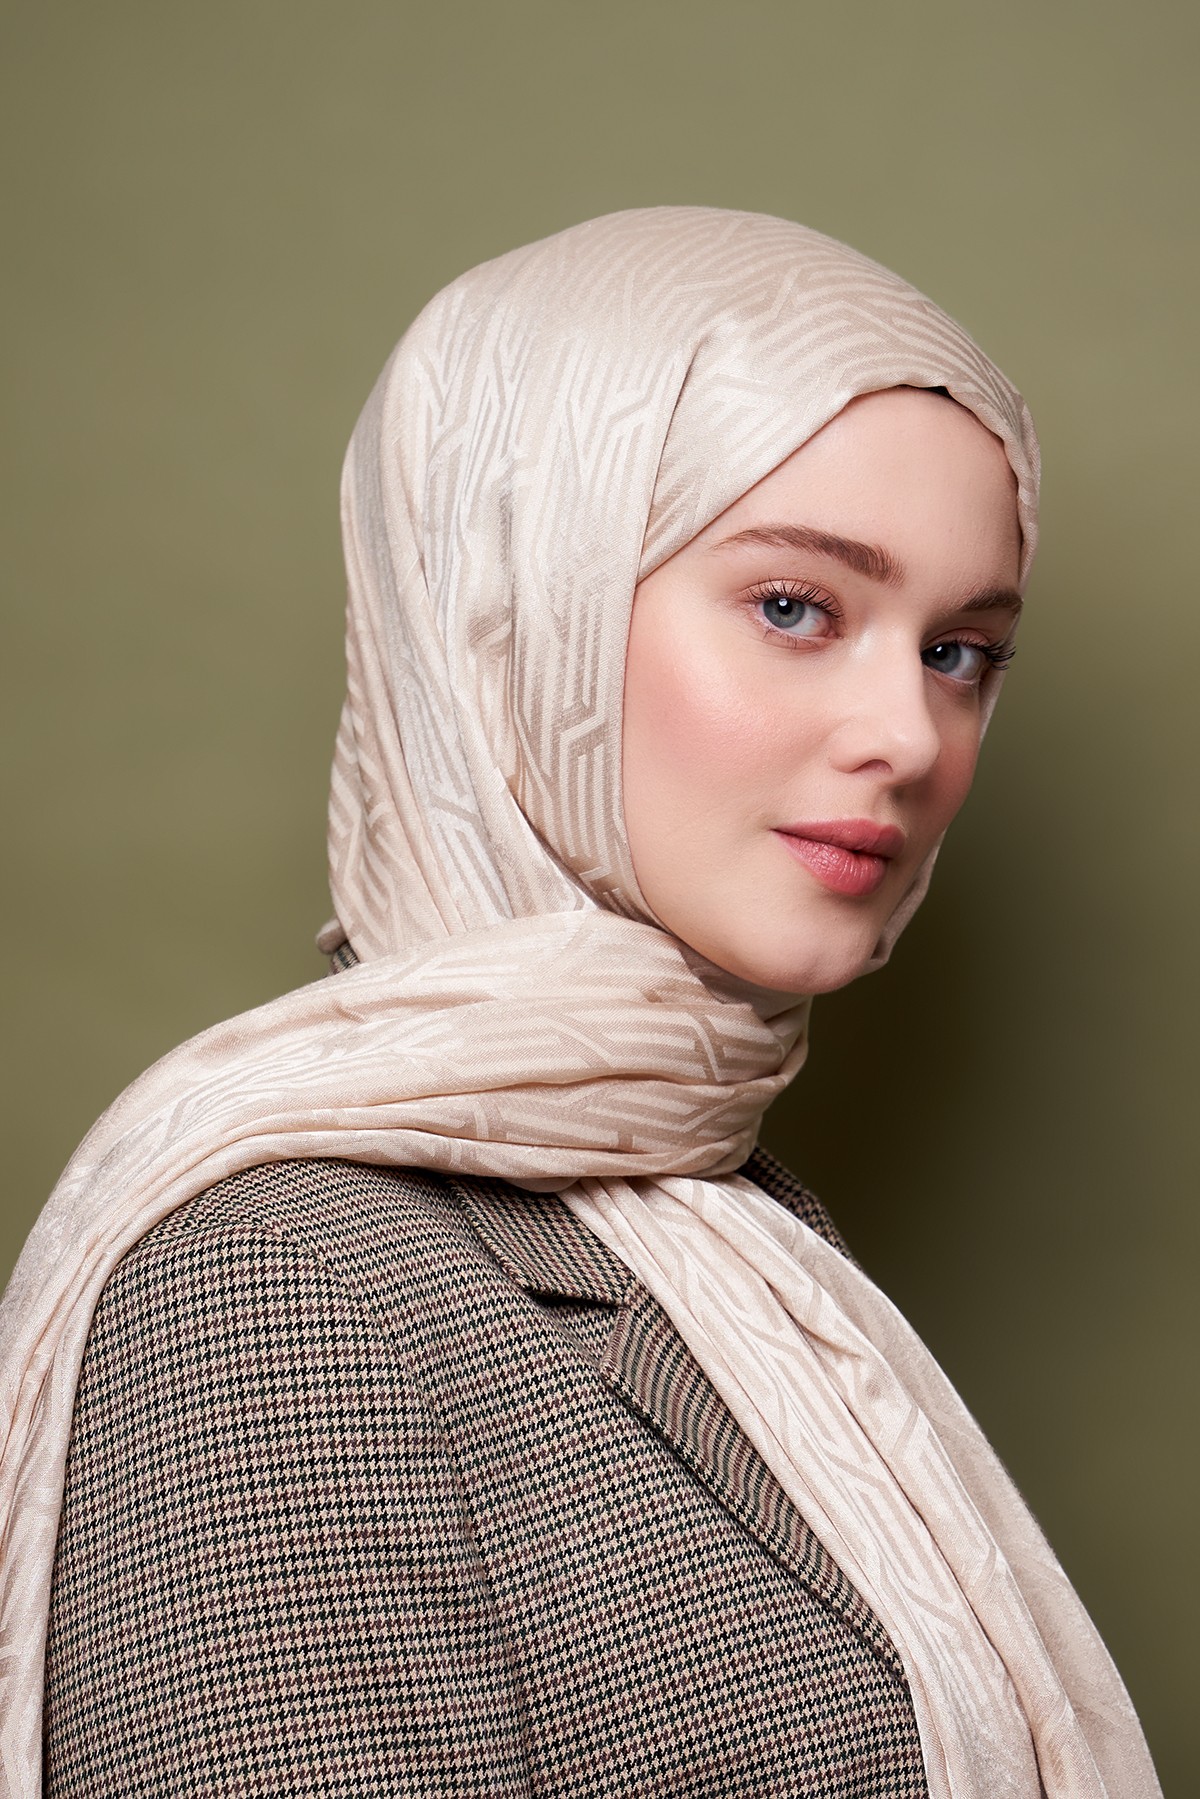 Harmony Jacquard Series Knitted Pattern Shawl - Silverberry